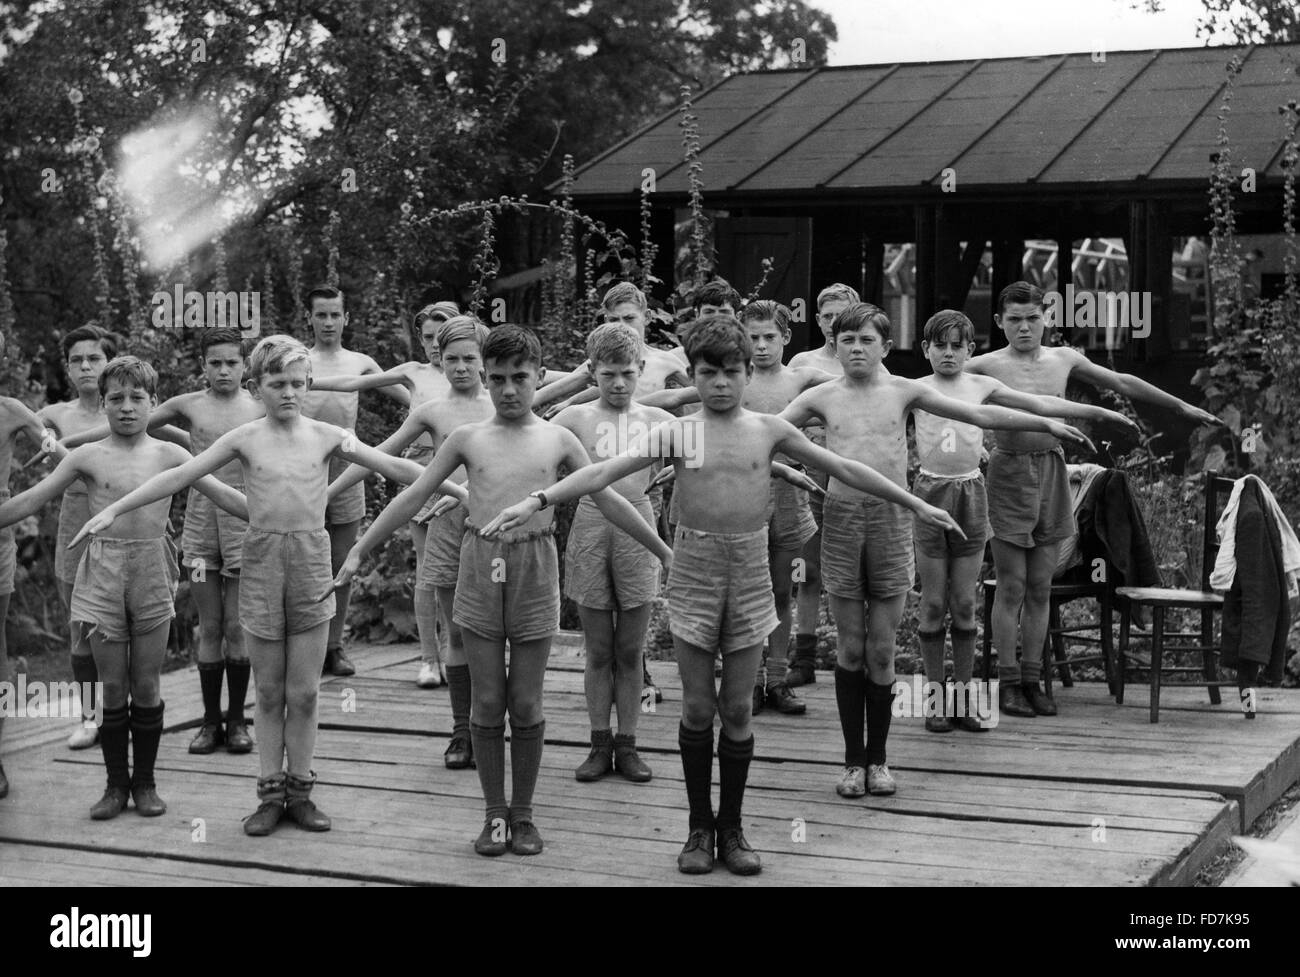 Boys of the Stowey House London County Council School in London doing gymnastics, 1938 Stock Photo